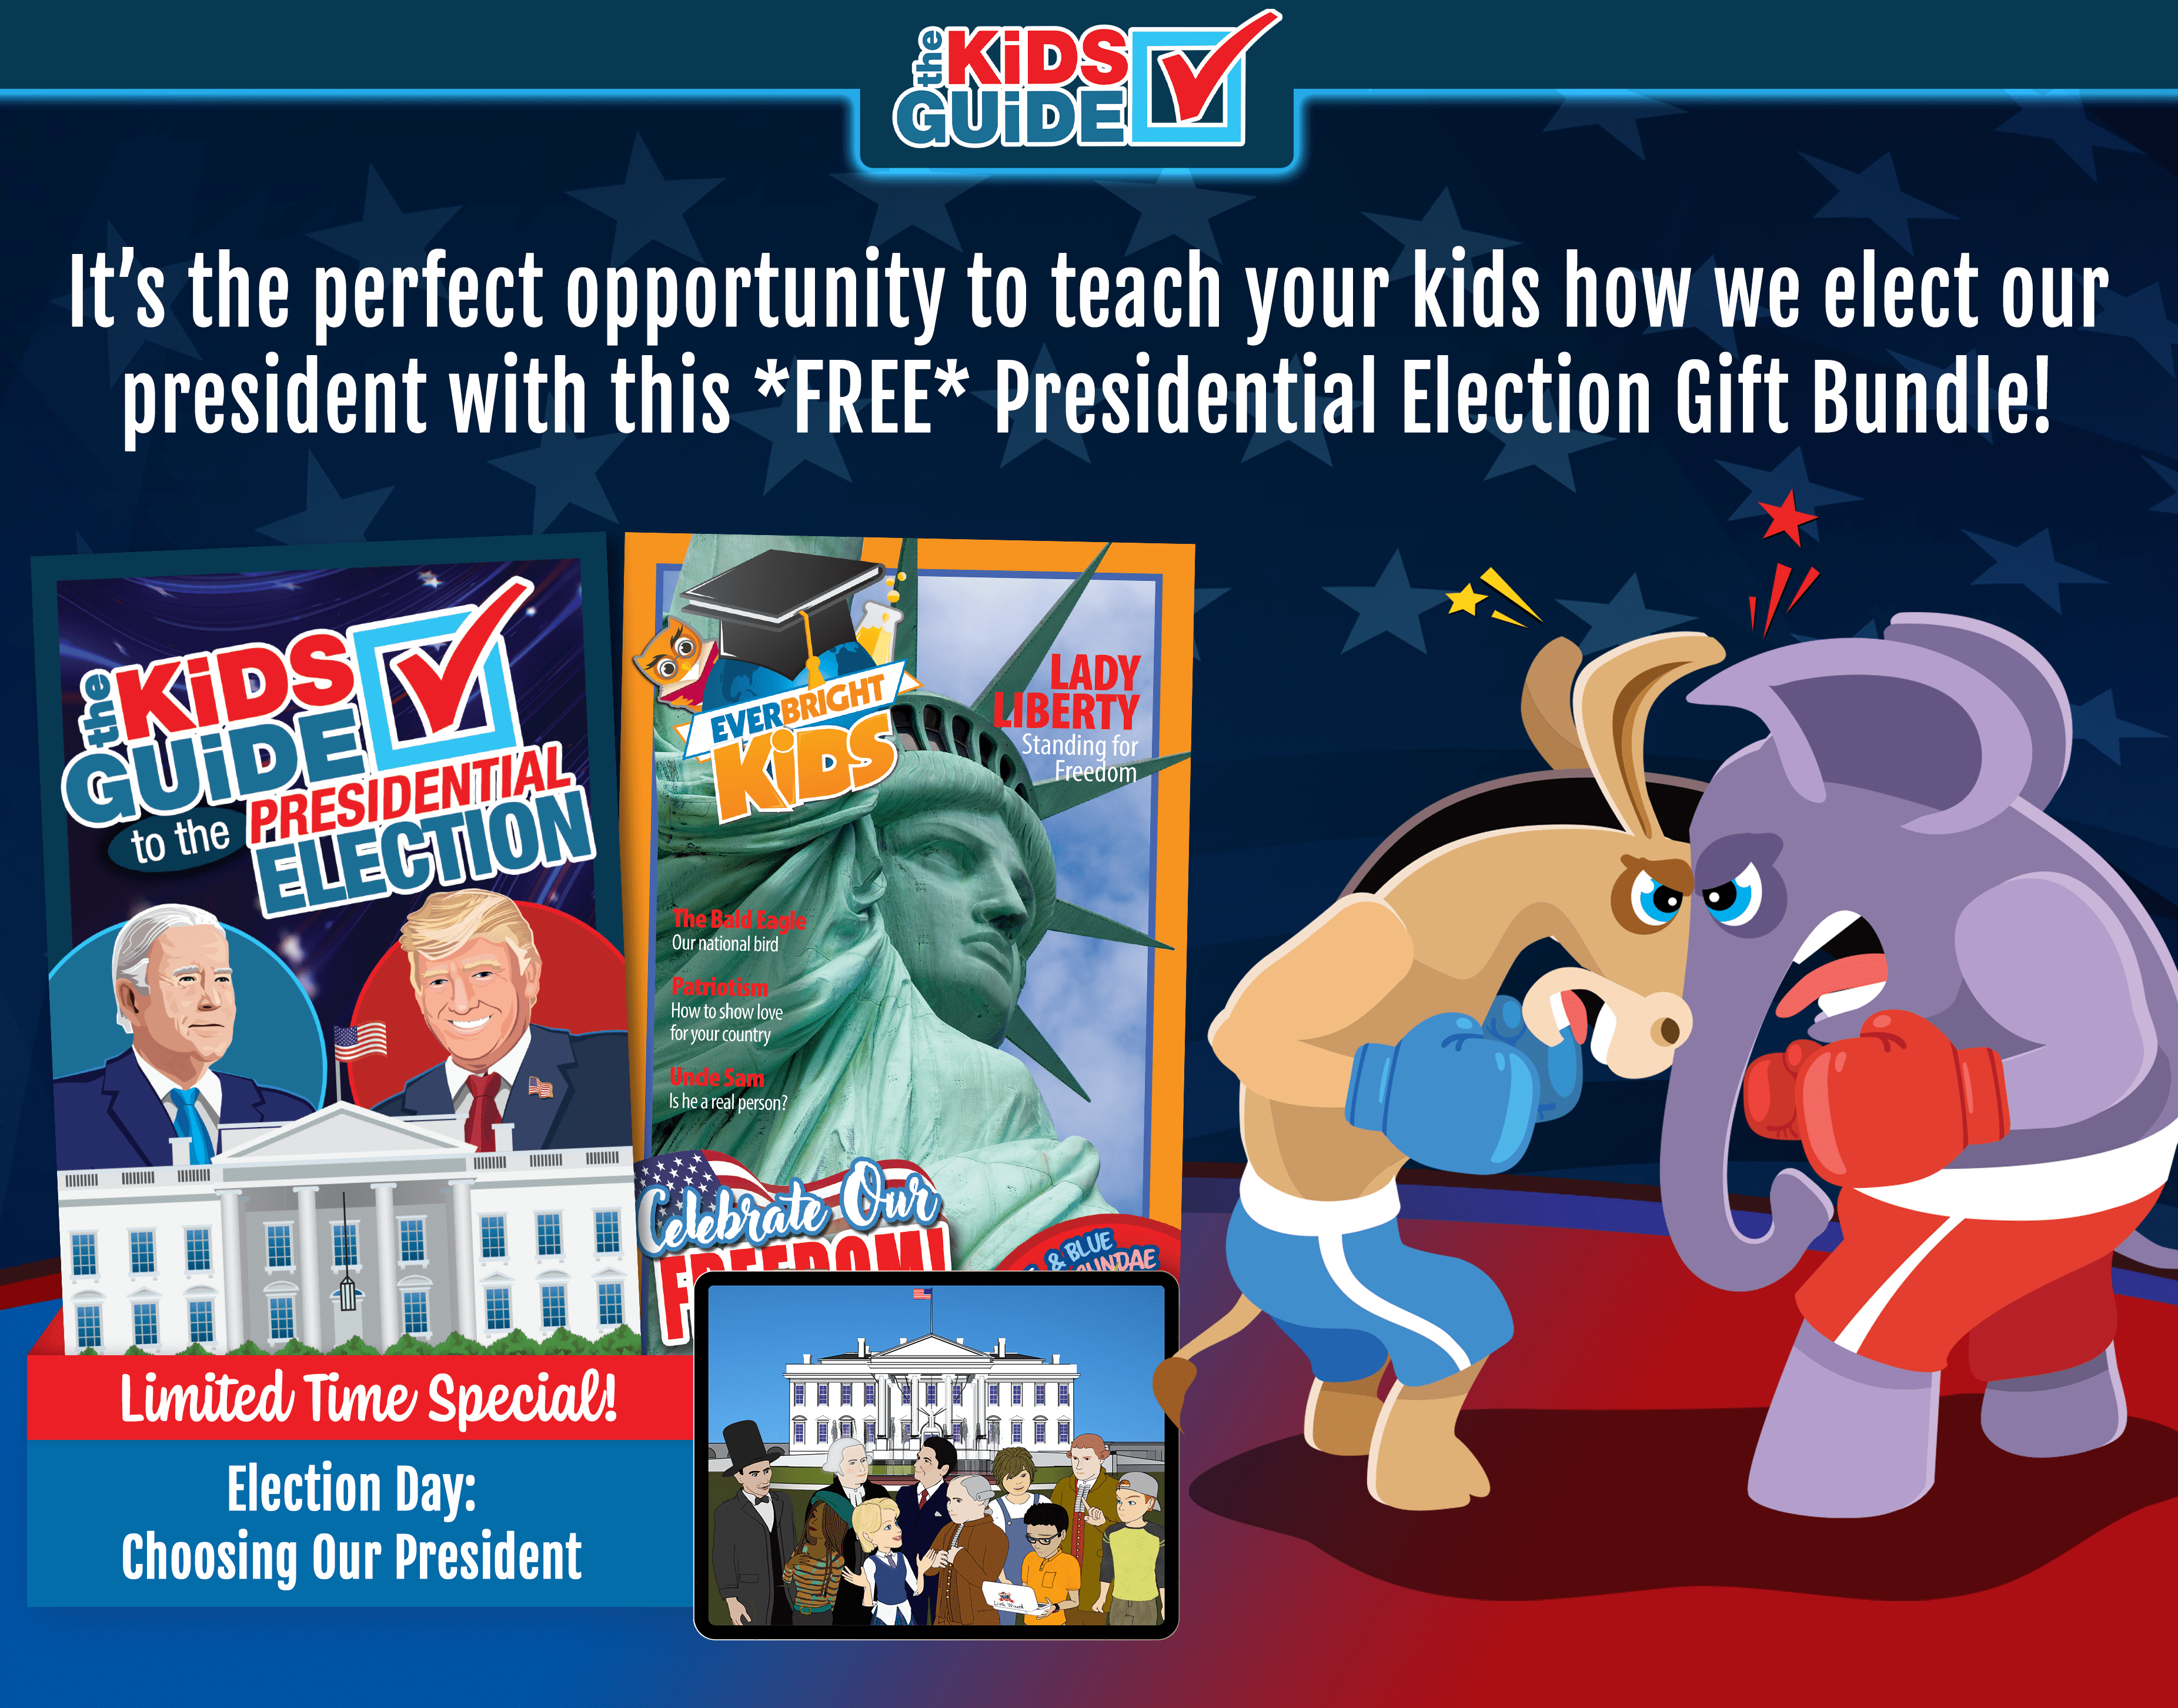 The Kids Guide to the Presidential Election